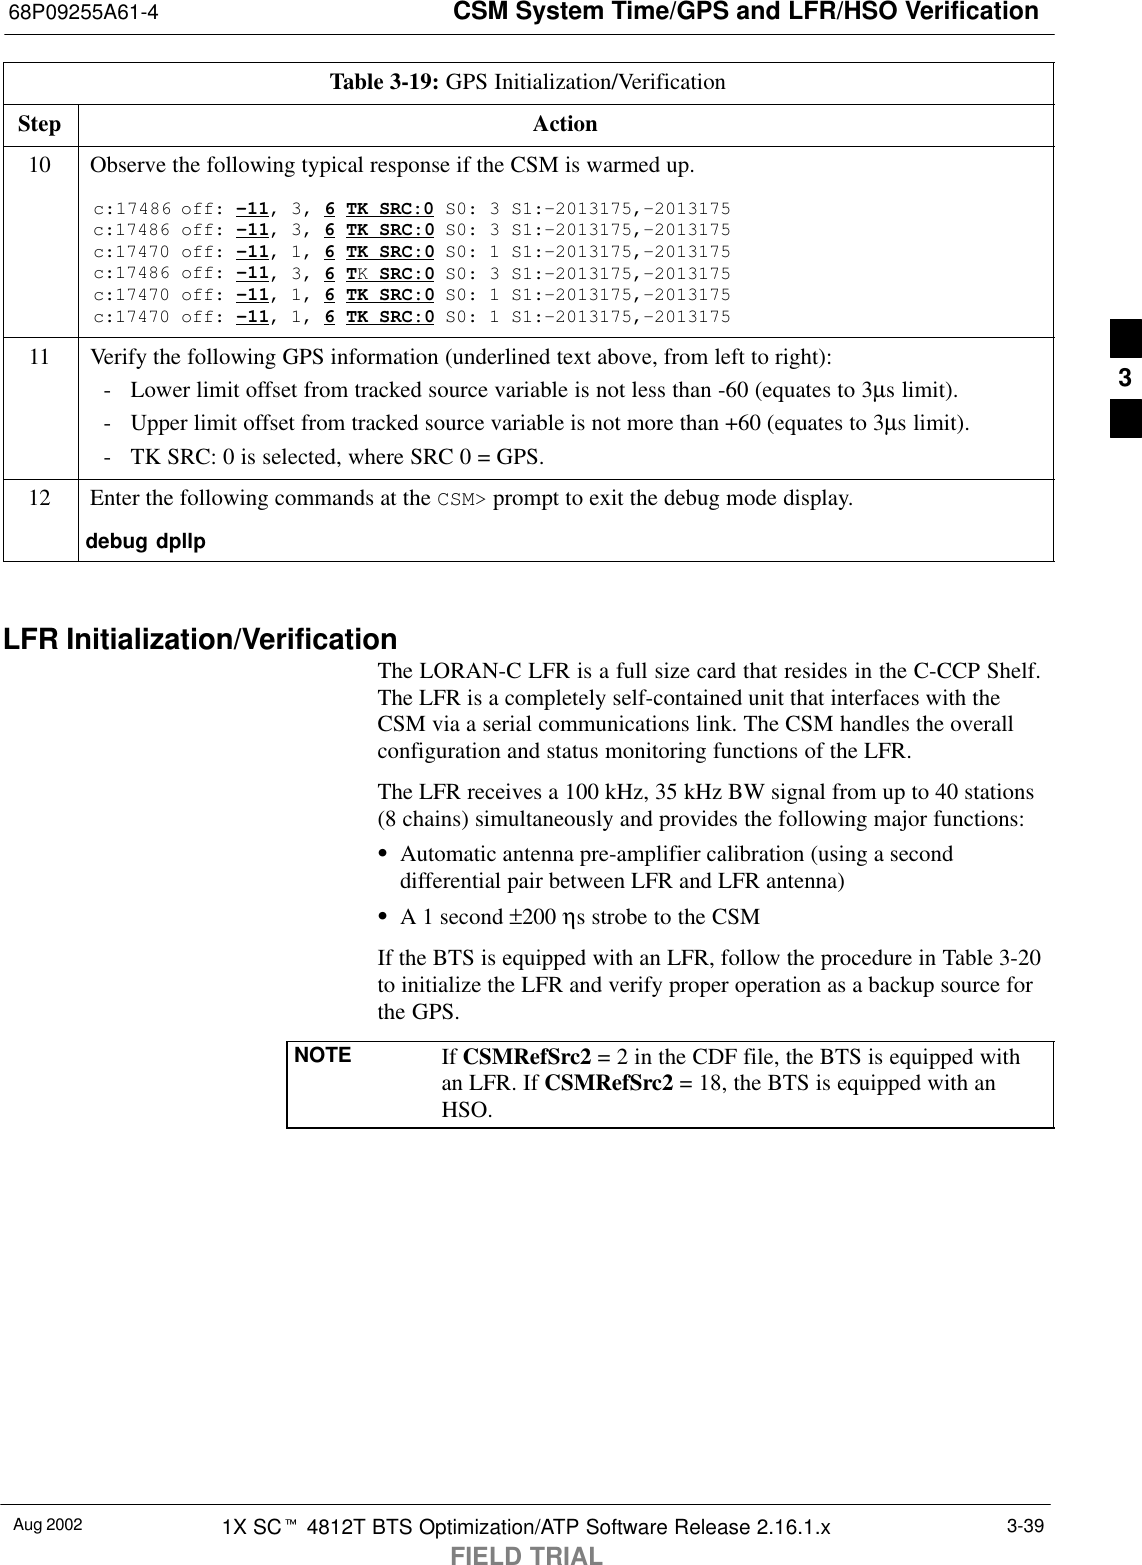 CSM System Time/GPS and LFR/HSO Verification68P09255A61-4Aug 2002 1X SCt 4812T BTS Optimization/ATP Software Release 2.16.1.xFIELD TRIAL3-39Table 3-19: GPS Initialization/VerificationStep Action10 Observe the following typical response if the CSM is warmed up.c:17486 off: -11, 3, 6 TK SRC:0 S0: 3 S1:-2013175,-2013175c:17486 off: -11, 3, 6 TK SRC:0 S0: 3 S1:-2013175,-2013175c:17470 off: -11, 1, 6 TK SRC:0 S0: 1 S1:-2013175,-2013175c:17486 off: -11, 3, 6 TK SRC:0 S0: 3 S1:-2013175,-2013175c:17470 off: -11, 1, 6 TK SRC:0 S0: 1 S1:-2013175,-2013175c:17470 off: -11, 1, 6 TK SRC:0 S0: 1 S1:-2013175,-201317511 Verify the following GPS information (underlined text above, from left to right):- Lower limit offset from tracked source variable is not less than -60 (equates to 3µs limit).- Upper limit offset from tracked source variable is not more than +60 (equates to 3µs limit).- TK SRC: 0 is selected, where SRC 0 = GPS.12 Enter the following commands at the CSM&gt; prompt to exit the debug mode display.debug dpllp LFR Initialization/VerificationThe LORAN-C LFR is a full size card that resides in the C-CCP Shelf.The LFR is a completely self-contained unit that interfaces with theCSM via a serial communications link. The CSM handles the overallconfiguration and status monitoring functions of the LFR.The LFR receives a 100 kHz, 35 kHz BW signal from up to 40 stations(8 chains) simultaneously and provides the following major functions:SAutomatic antenna pre-amplifier calibration (using a seconddifferential pair between LFR and LFR antenna)SA 1 second ±200 ηs strobe to the CSMIf the BTS is equipped with an LFR, follow the procedure in Table 3-20to initialize the LFR and verify proper operation as a backup source forthe GPS.NOTE If CSMRefSrc2 = 2 in the CDF file, the BTS is equipped withan LFR. If CSMRefSrc2 = 18, the BTS is equipped with anHSO.3